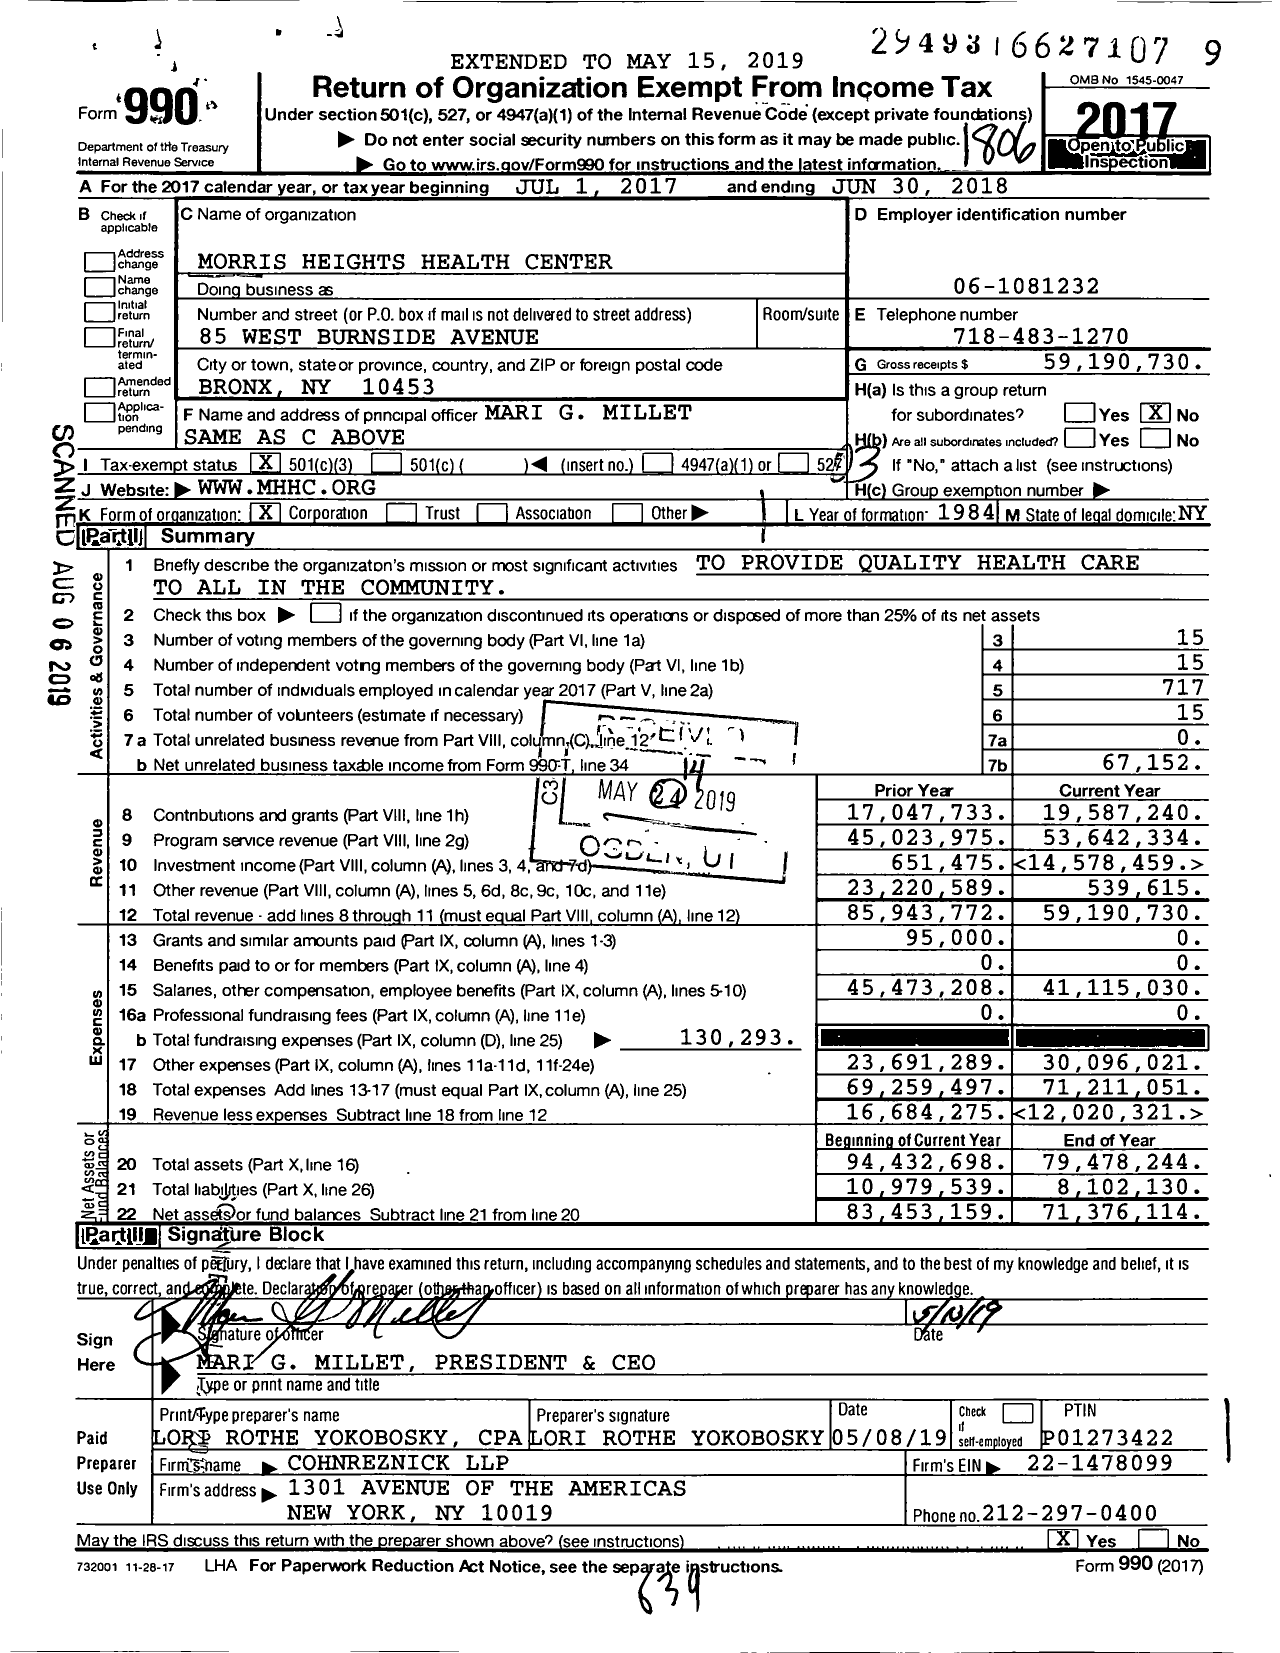 Image of first page of 2017 Form 990 for Morris Heights Health Center (MHHC)